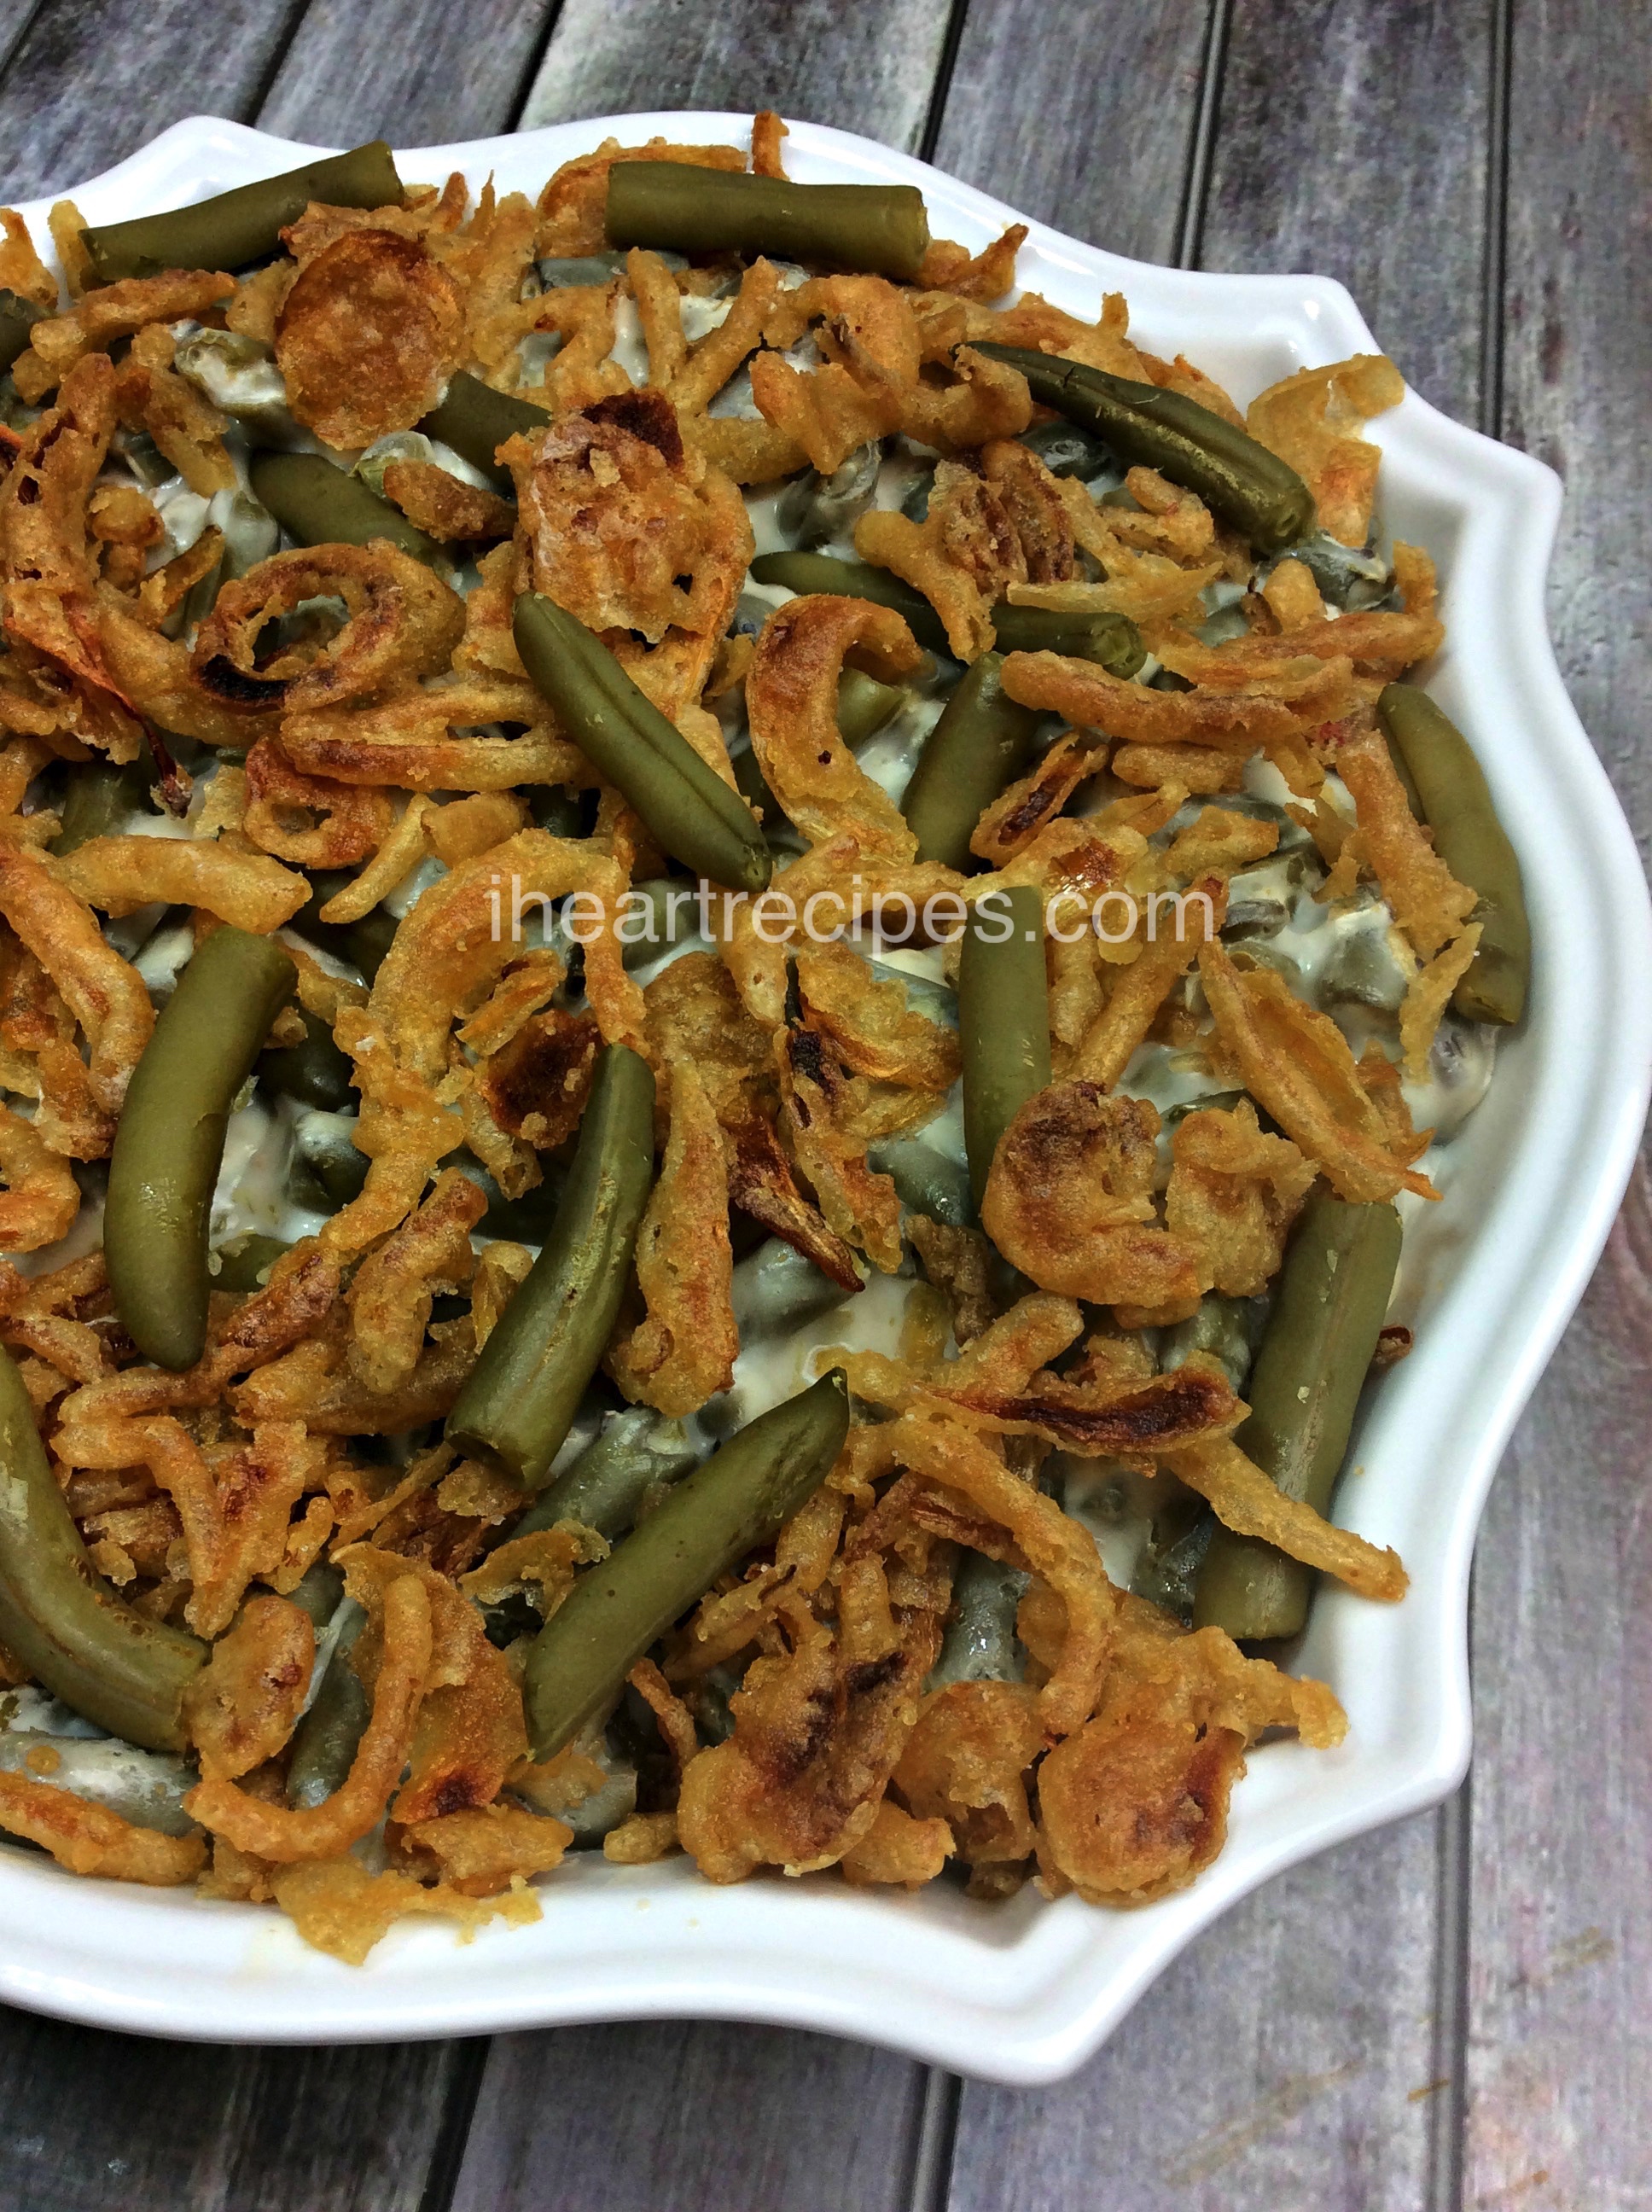 You can't beat a classic green bean casserole as the perfect side dish for a holiday meal